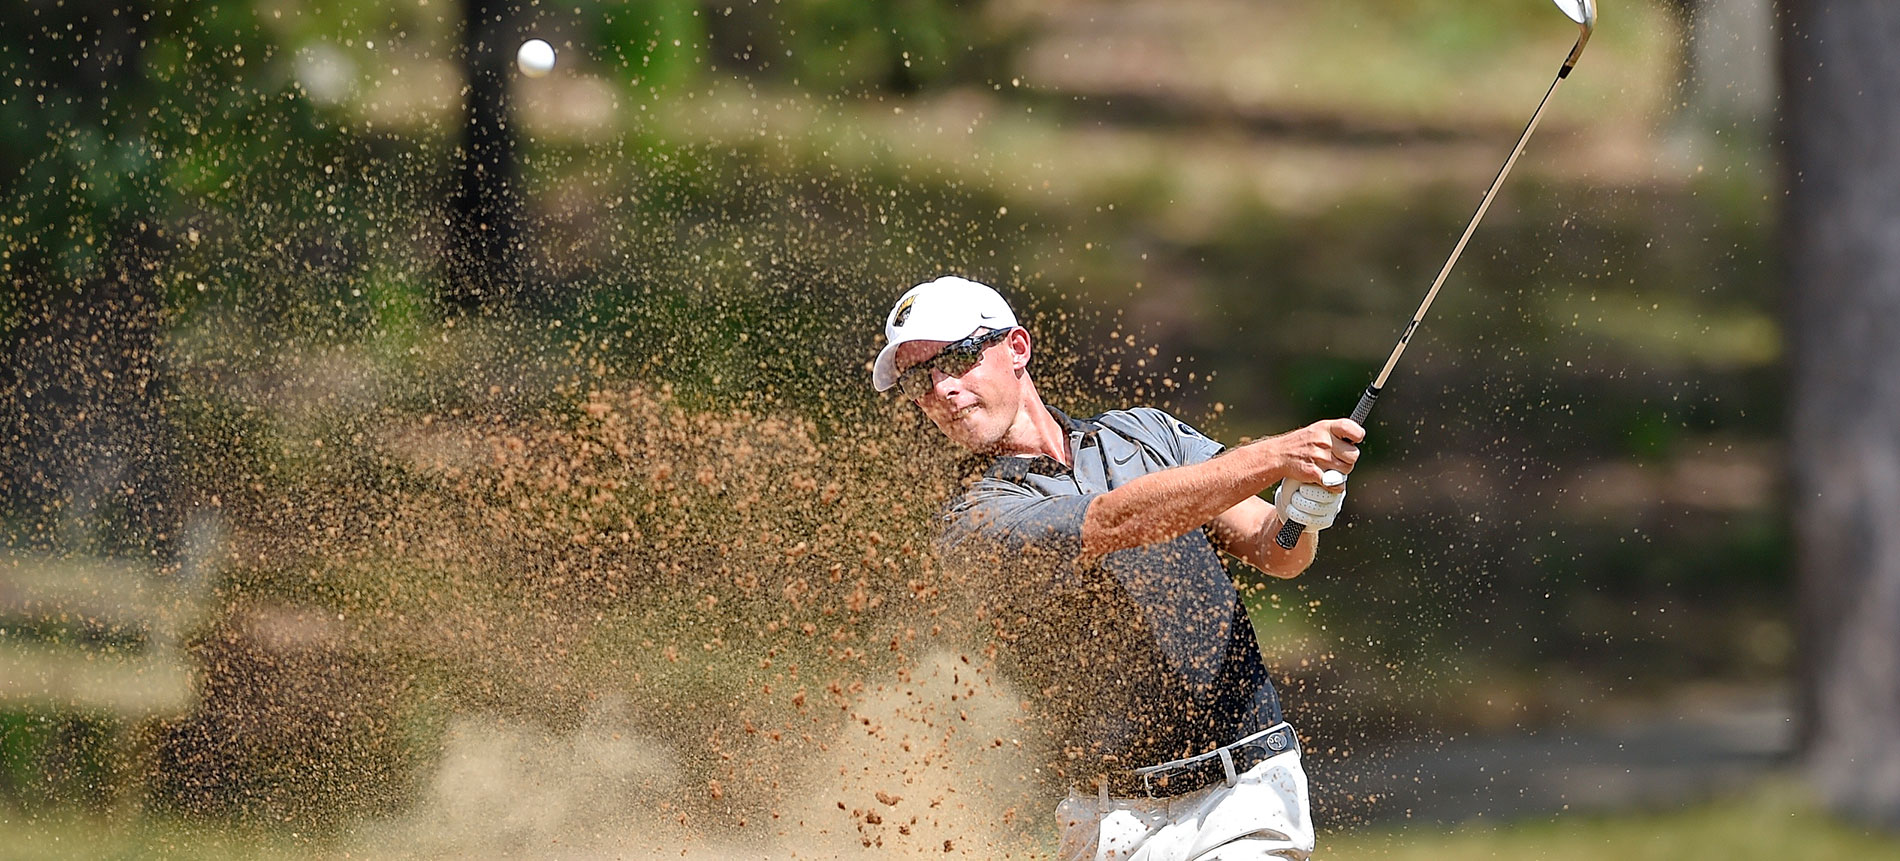 Miller Tied for 35th Place Entering Final Round of South Carolina Men’s State Amateur Championship